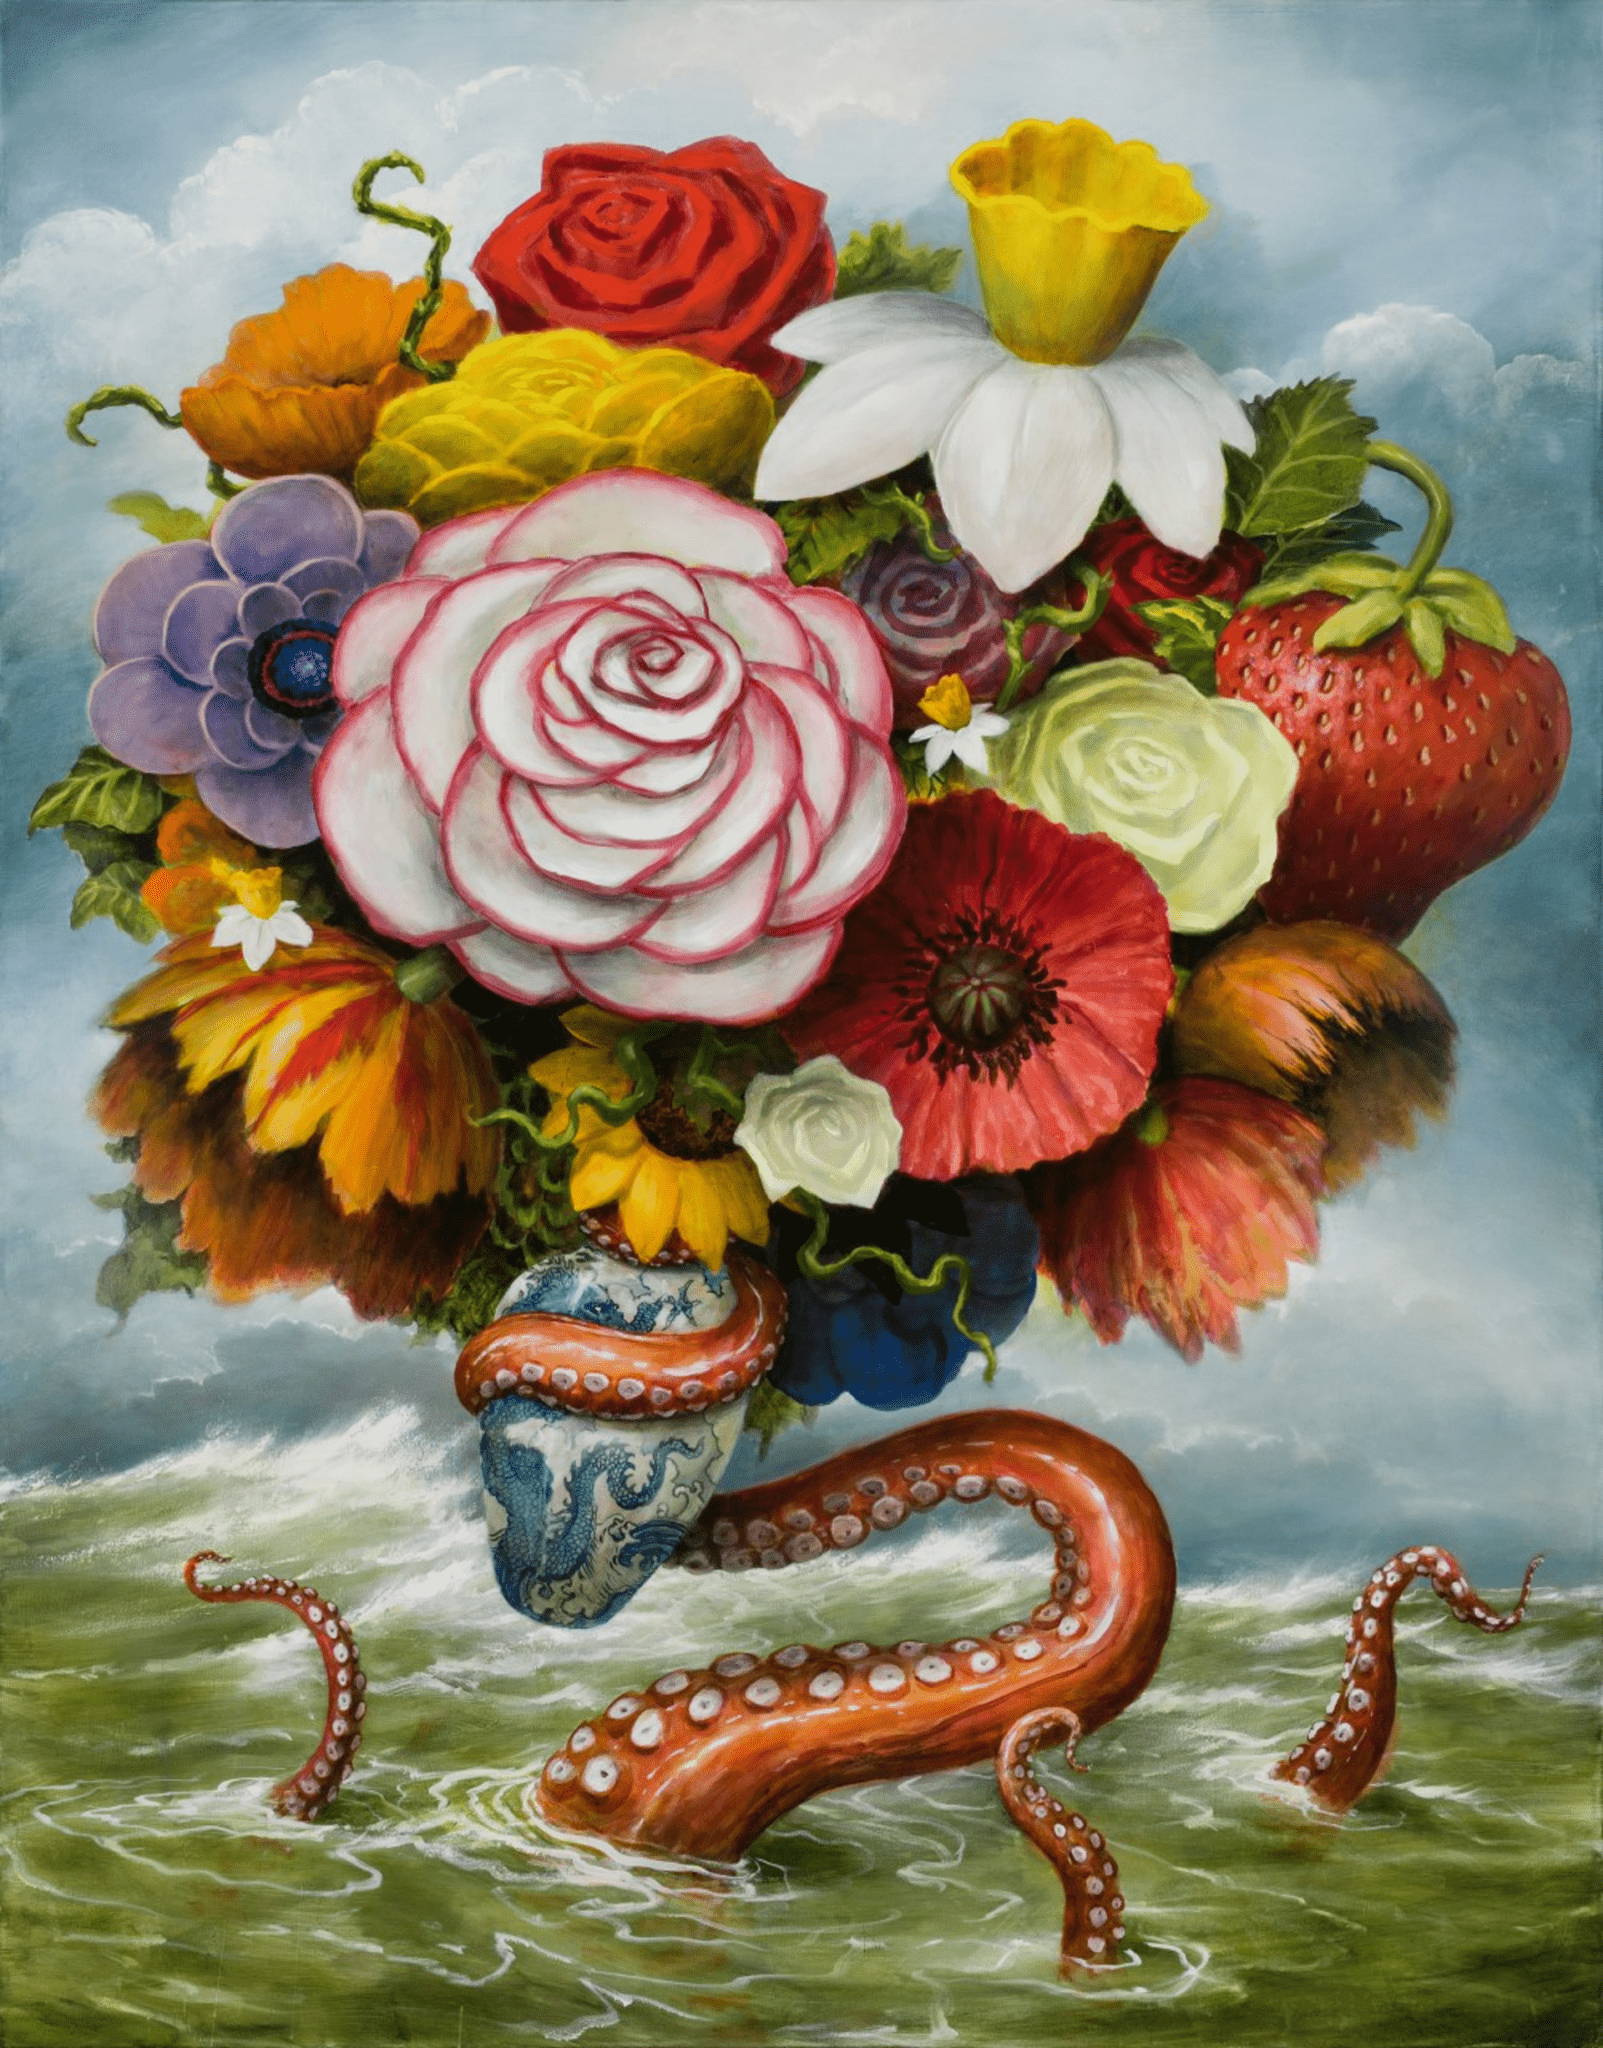 "Spring Raised Up From The Icy Depths Of Winter" (2023, acrylic on canvas, 84" x 66") by Kevin Sloan, available at K Contemporary